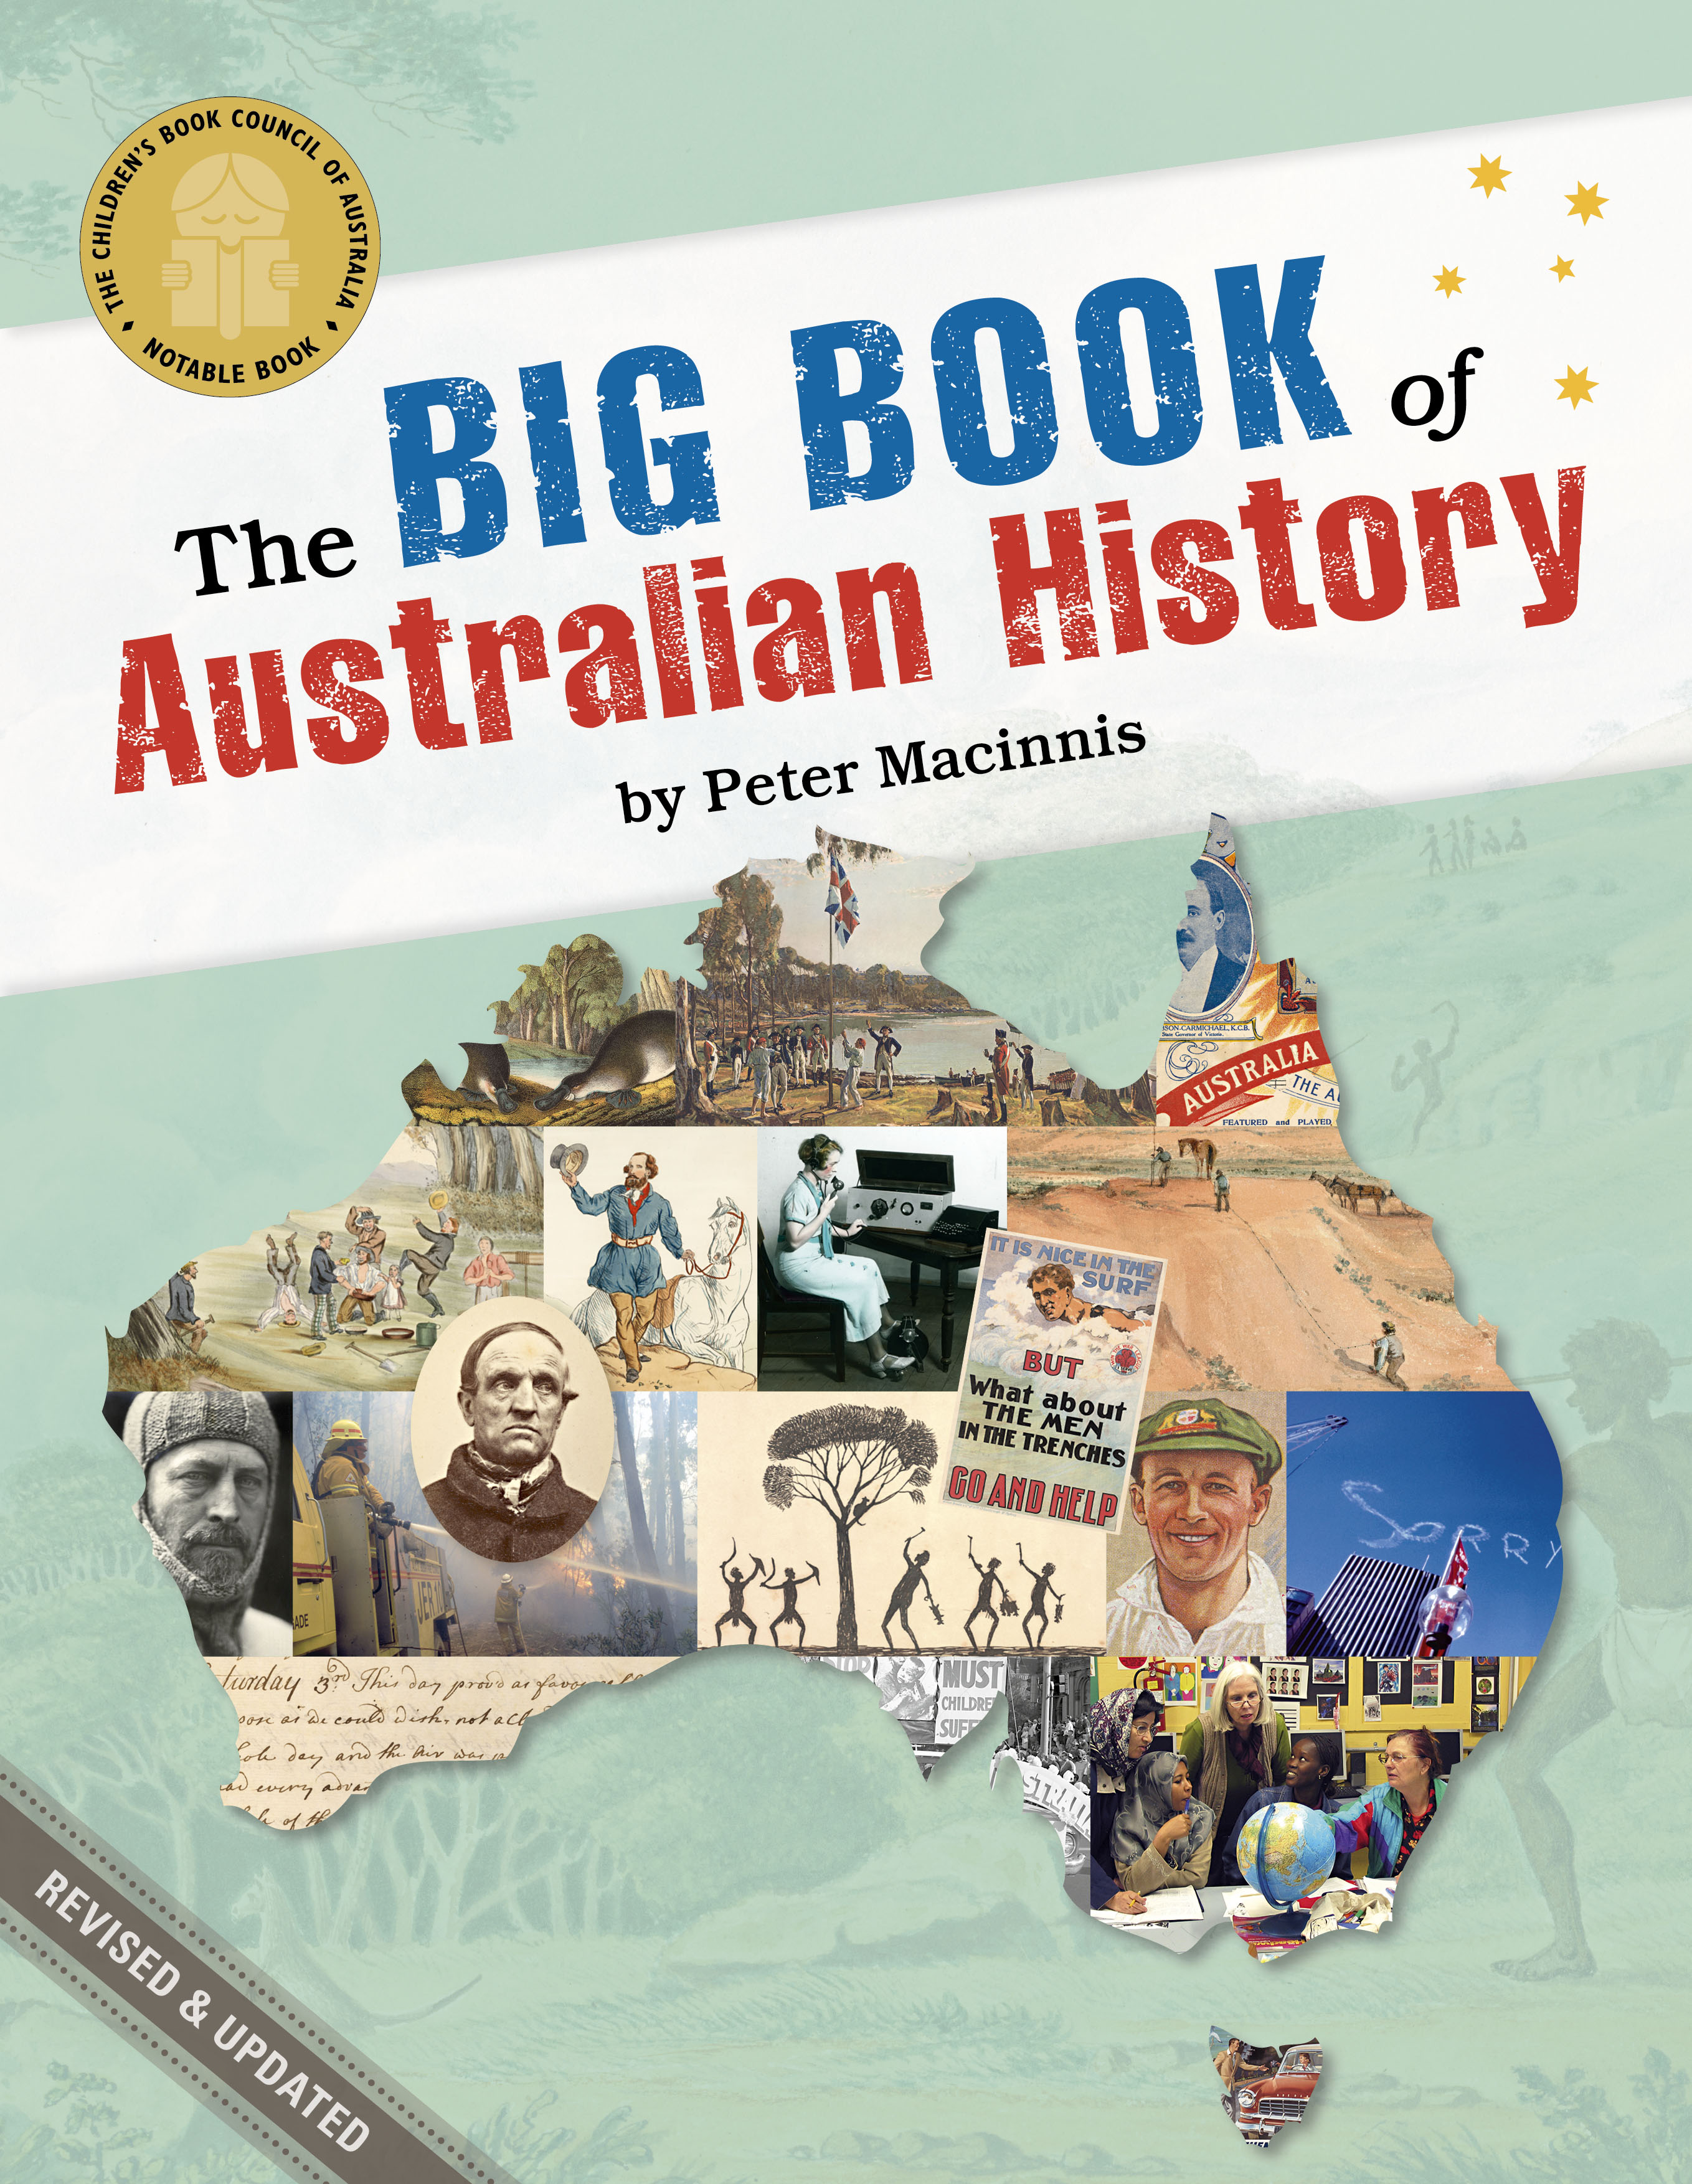 The Big Book of Australian History (revised & updated) Reading Time